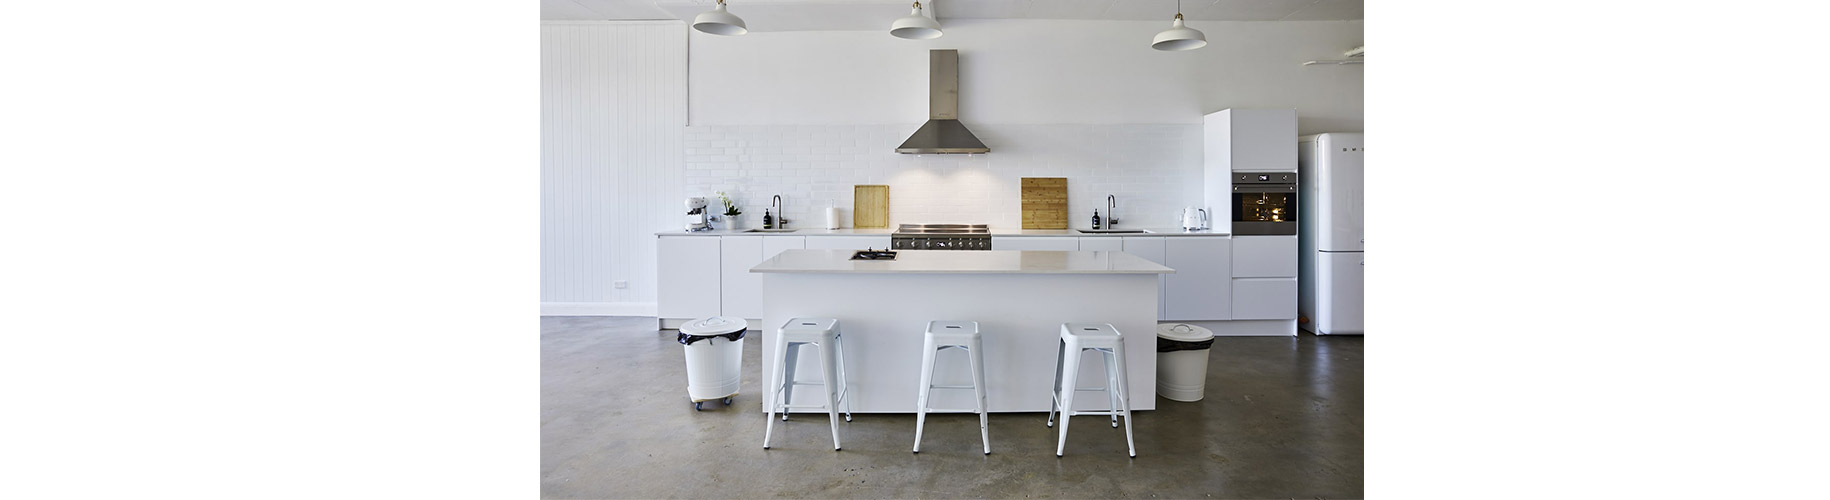 white kitchen and dining stools